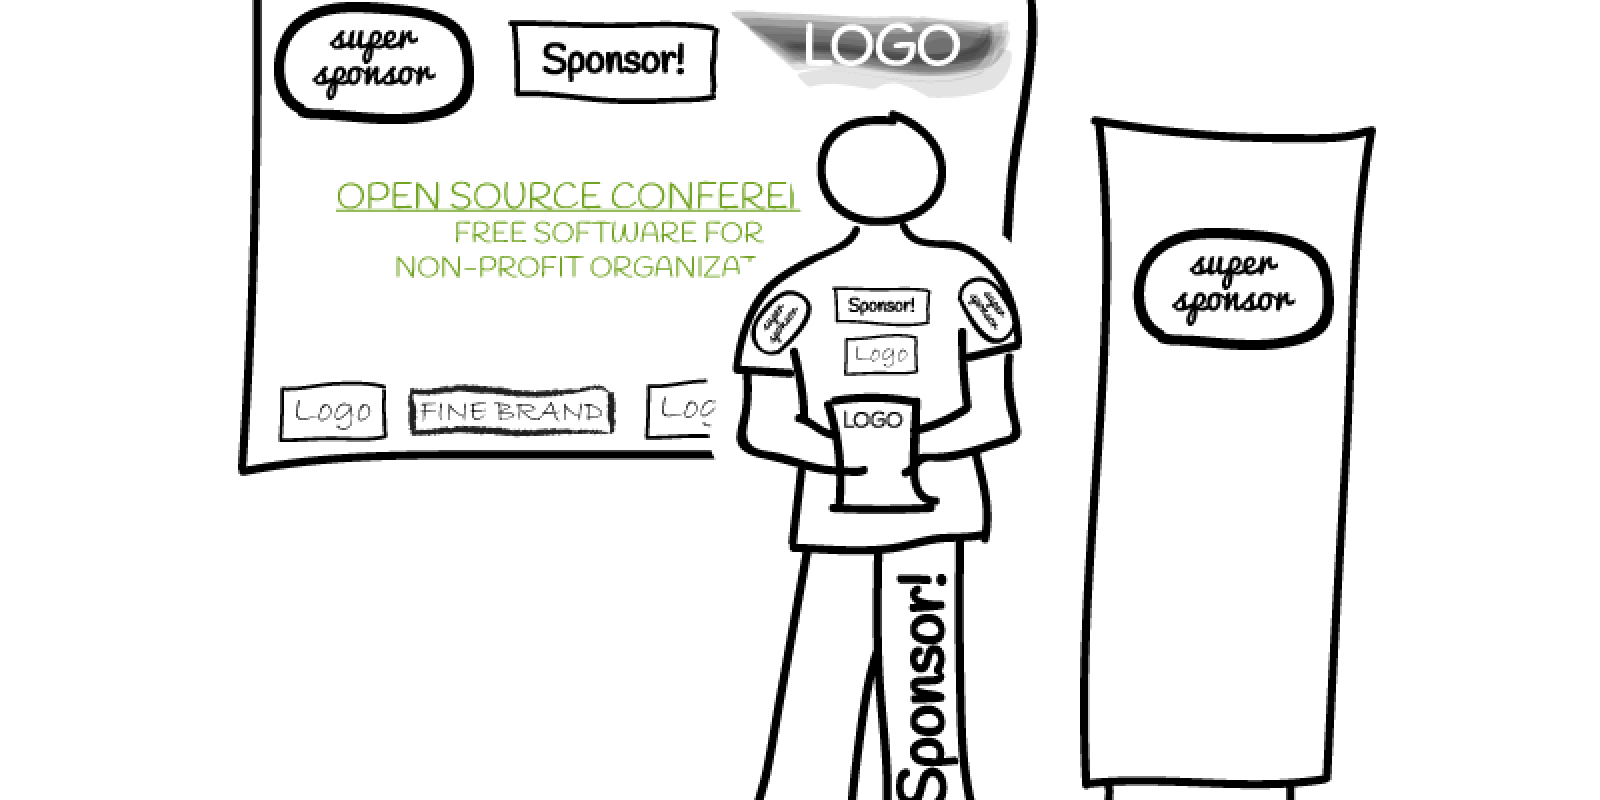 Sketch: Speaker in front of beamer screen, both cluttered with sponsor logos